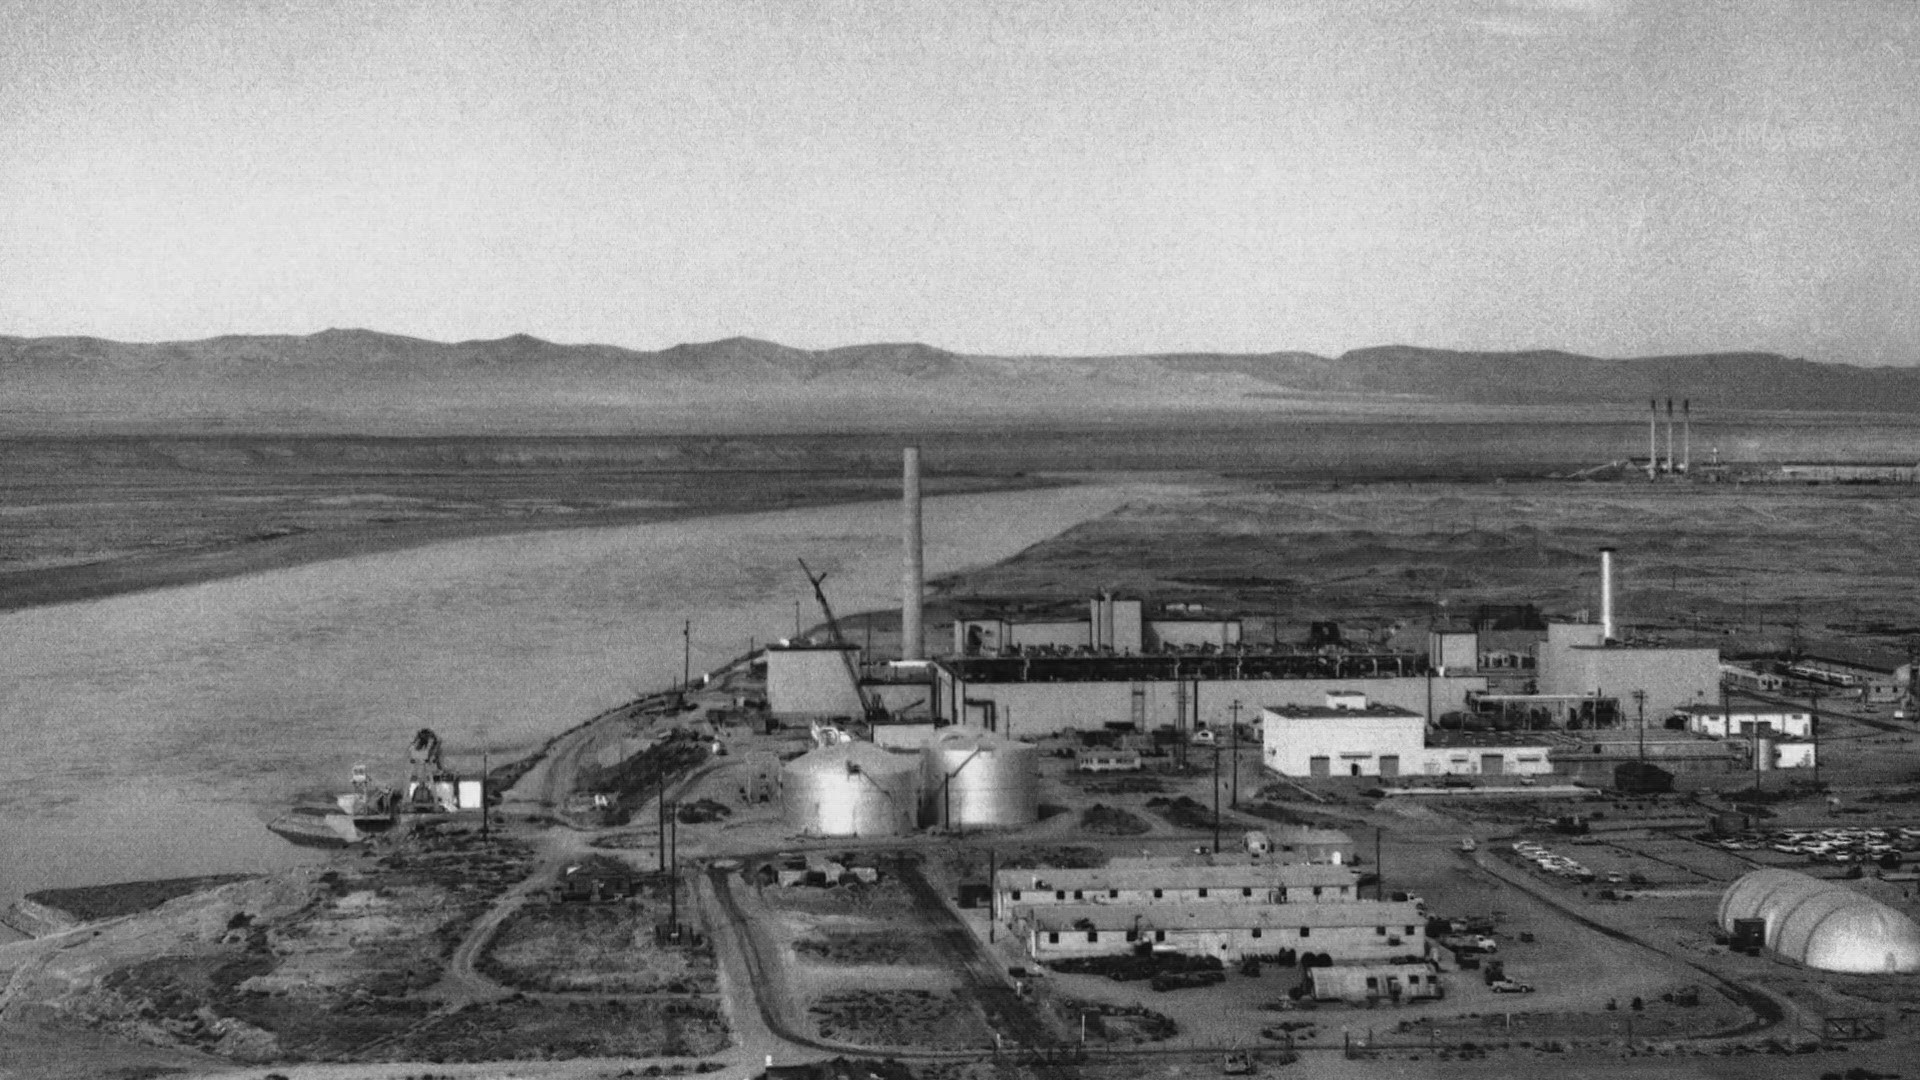 Some of the plutonium used in atomic bombs during World War II was developed in Washington state.